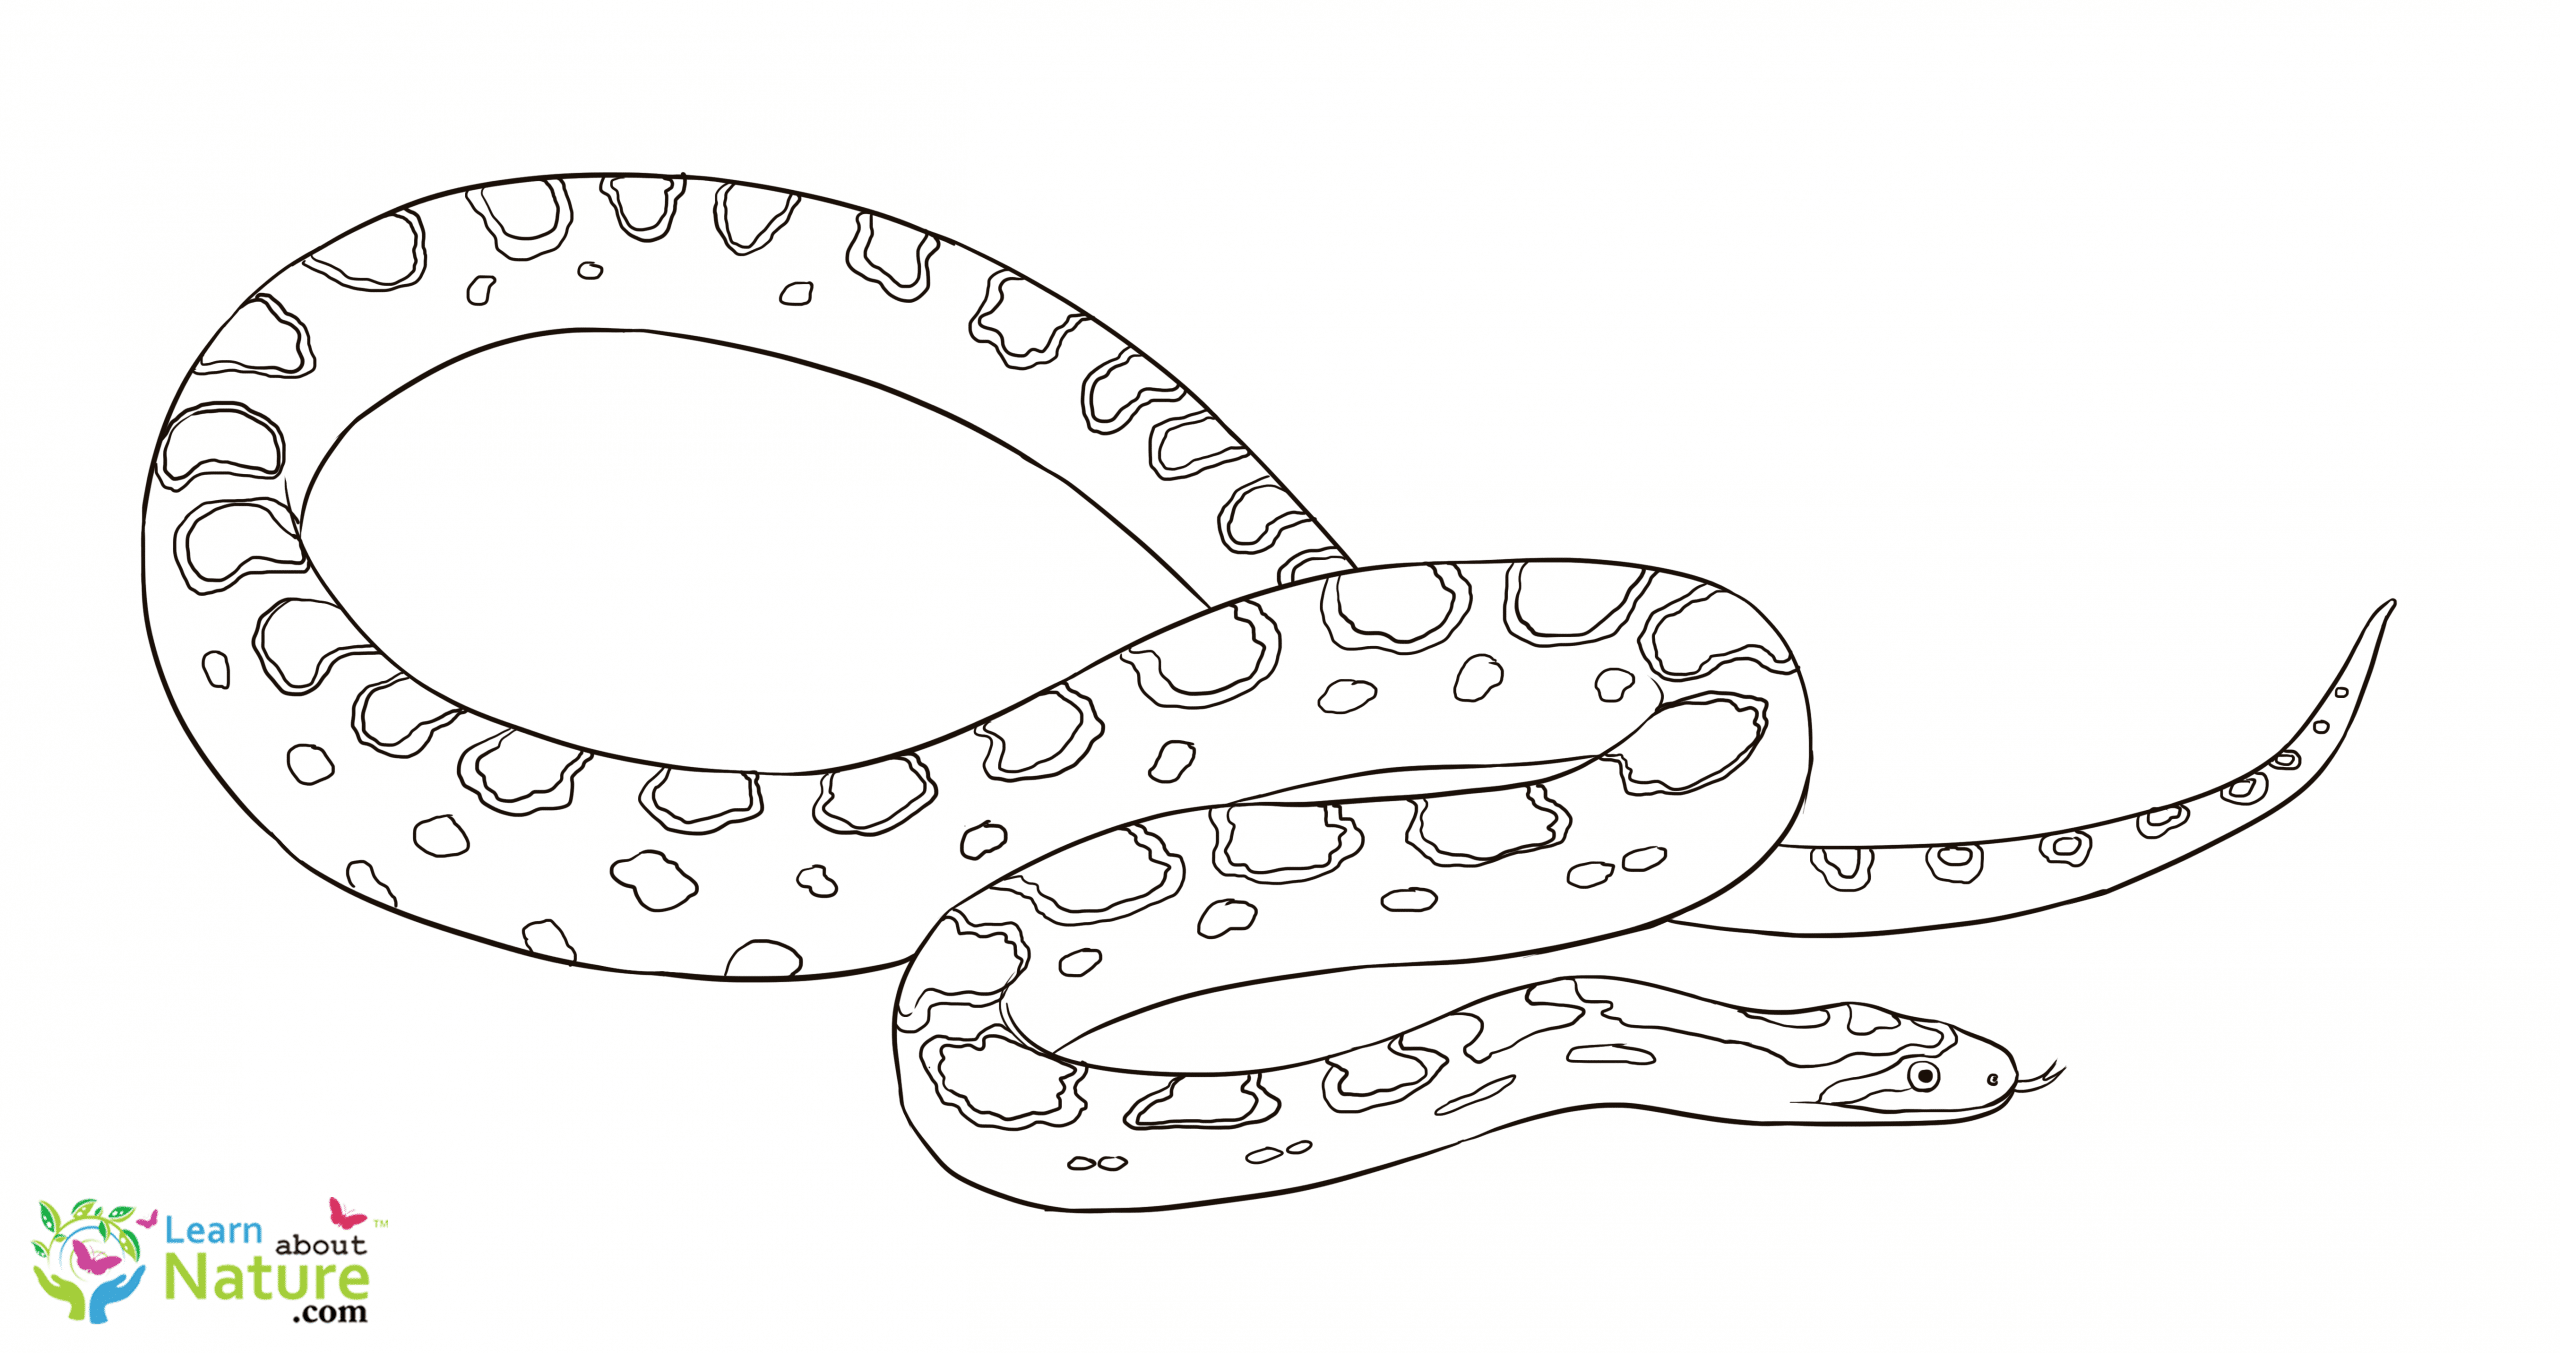 harry potter snake coloring page